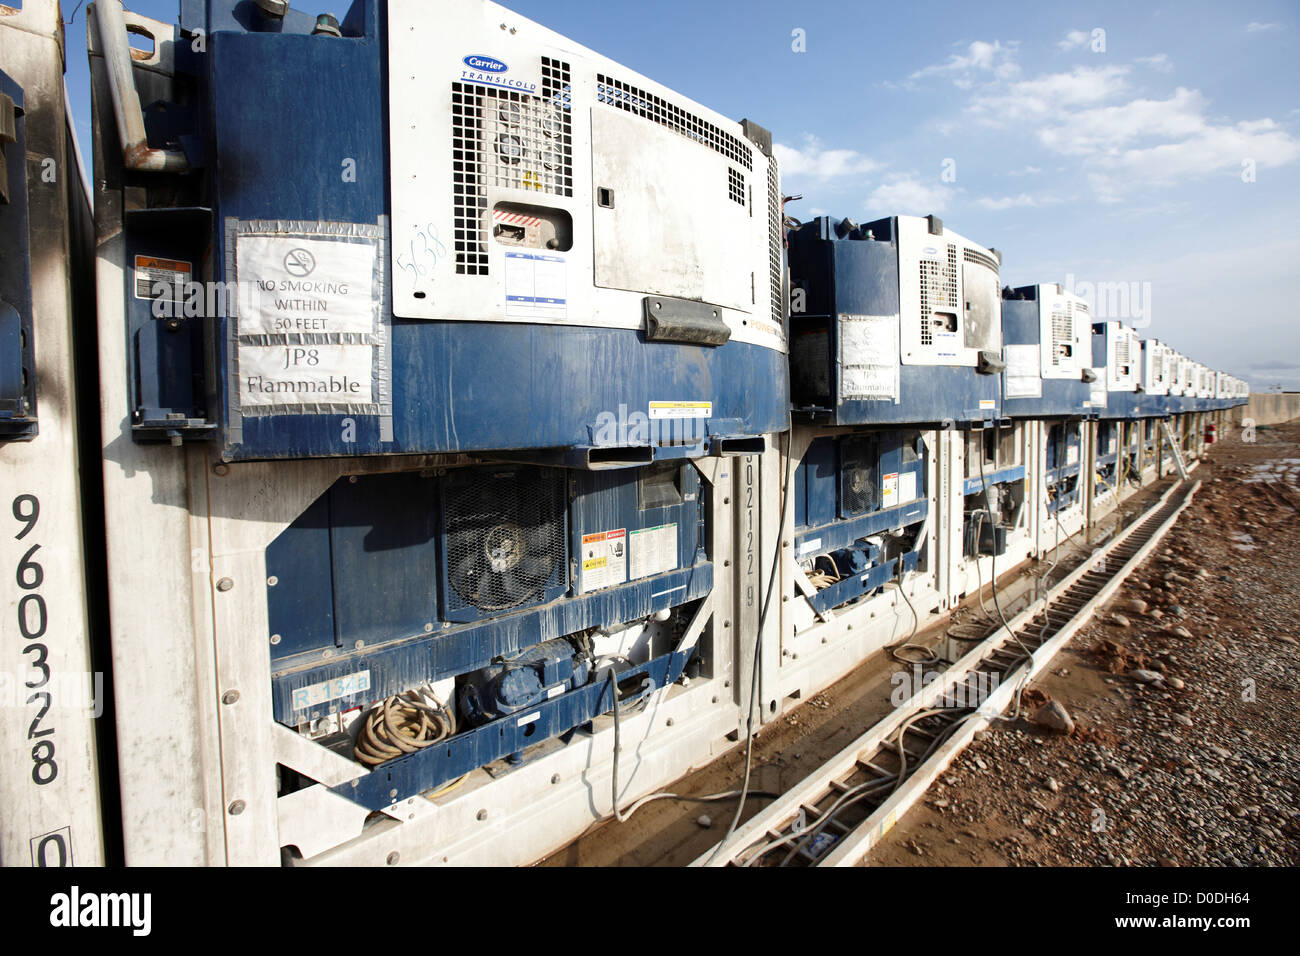 Refrigeration units at a large forward operating base in Afghanistan's Helmand Province Stock Photo